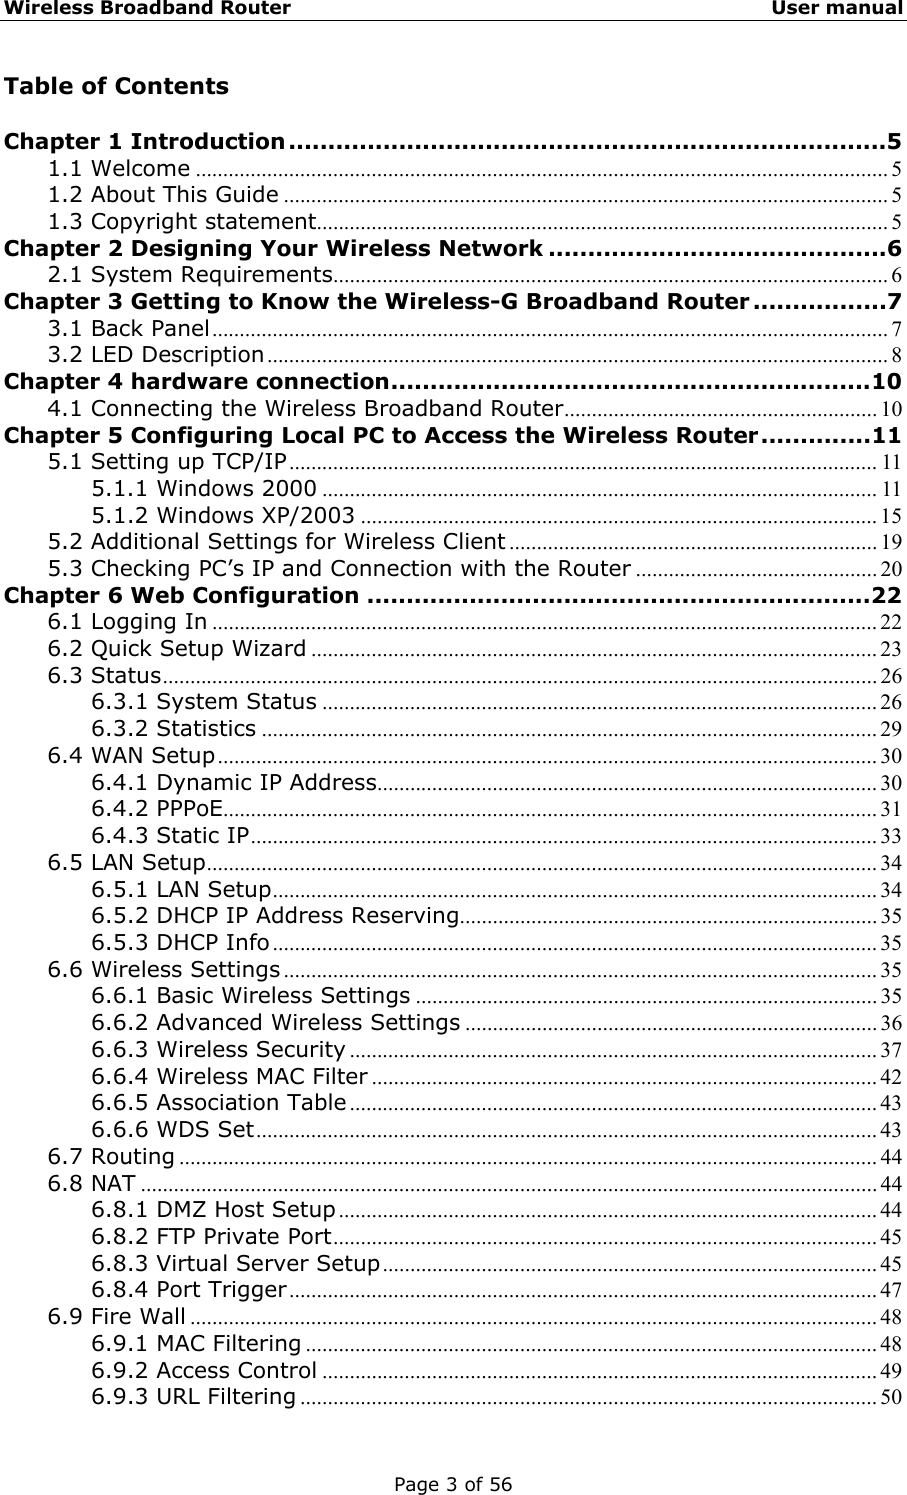 Wireless Broadband Router                                                   User manual Page 3 of 56 Table of Contents  Chapter 1 Introduction ............................................................................5 1.1 Welcome .............................................................................................................................. 5 1.2 About This Guide .............................................................................................................. 5 1.3 Copyright statement........................................................................................................ 5 Chapter 2 Designing Your Wireless Network ...........................................6 2.1 System Requirements..................................................................................................... 6 Chapter 3 Getting to Know the Wireless-G Broadband Router .................7 3.1 Back Panel........................................................................................................................... 7 3.2 LED Description................................................................................................................. 8 Chapter 4 hardware connection.............................................................10 4.1 Connecting the Wireless Broadband Router......................................................... 10 Chapter 5 Configuring Local PC to Access the Wireless Router..............11 5.1 Setting up TCP/IP........................................................................................................... 11 5.1.1 Windows 2000 ..................................................................................................... 11 5.1.2 Windows XP/2003 .............................................................................................. 15 5.2 Additional Settings for Wireless Client ................................................................... 19 5.3 Checking PC’s IP and Connection with the Router ............................................ 20 Chapter 6 Web Configuration ................................................................22 6.1 Logging In ......................................................................................................................... 22 6.2 Quick Setup Wizard ....................................................................................................... 23 6.3 Status.................................................................................................................................. 26 6.3.1 System Status ..................................................................................................... 26 6.3.2 Statistics ................................................................................................................ 29 6.4 WAN Setup........................................................................................................................ 30 6.4.1 Dynamic IP Address........................................................................................... 30 6.4.2 PPPoE....................................................................................................................... 31 6.4.3 Static IP.................................................................................................................. 33 6.5 LAN Setup.......................................................................................................................... 34 6.5.1 LAN Setup.............................................................................................................. 34 6.5.2 DHCP IP Address Reserving............................................................................ 35 6.5.3 DHCP Info.............................................................................................................. 35 6.6 Wireless Settings ............................................................................................................ 35 6.6.1 Basic Wireless Settings .................................................................................... 35 6.6.2 Advanced Wireless Settings ........................................................................... 36 6.6.3 Wireless Security ................................................................................................ 37 6.6.4 Wireless MAC Filter ............................................................................................ 42 6.6.5 Association Table ................................................................................................ 43 6.6.6 WDS Set................................................................................................................. 43 6.7 Routing ............................................................................................................................... 44 6.8 NAT ...................................................................................................................................... 44 6.8.1 DMZ Host Setup.................................................................................................. 44 6.8.2 FTP Private Port................................................................................................... 45 6.8.3 Virtual Server Setup.......................................................................................... 45 6.8.4 Port Trigger........................................................................................................... 47 6.9 Fire Wall ............................................................................................................................. 48 6.9.1 MAC Filtering ........................................................................................................ 48 6.9.2 Access Control ..................................................................................................... 49 6.9.3 URL Filtering ......................................................................................................... 50 